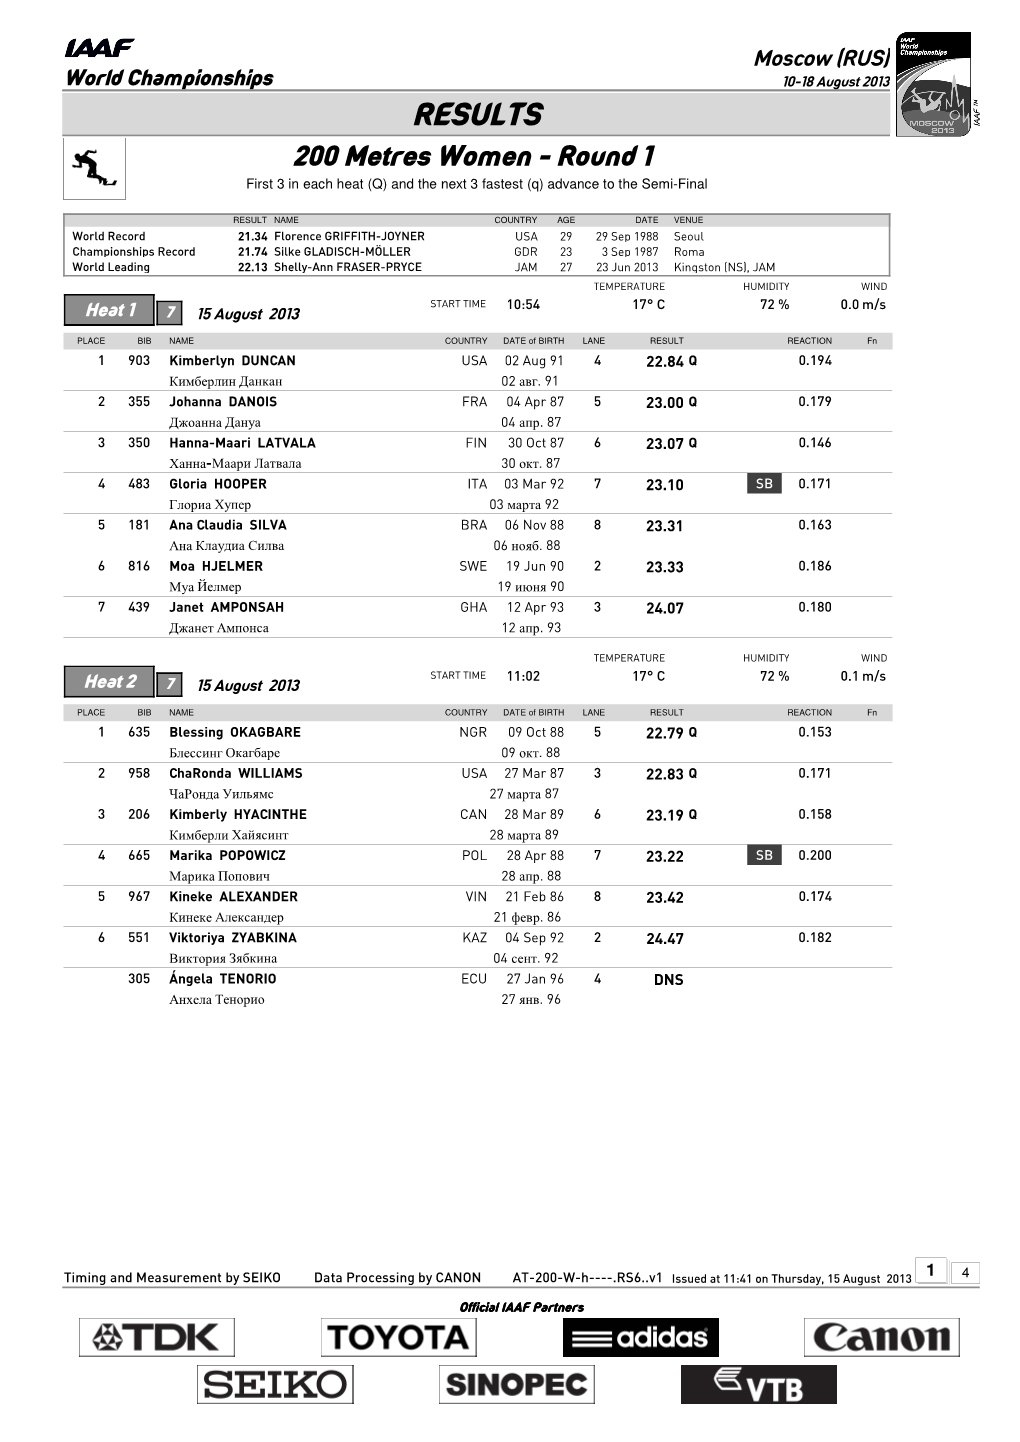 RESULTS 200 Metres Women - Round 1 First 3 in Each Heat (Q) and the Next 3 Fastest (Q) Advance to the Semi-Final